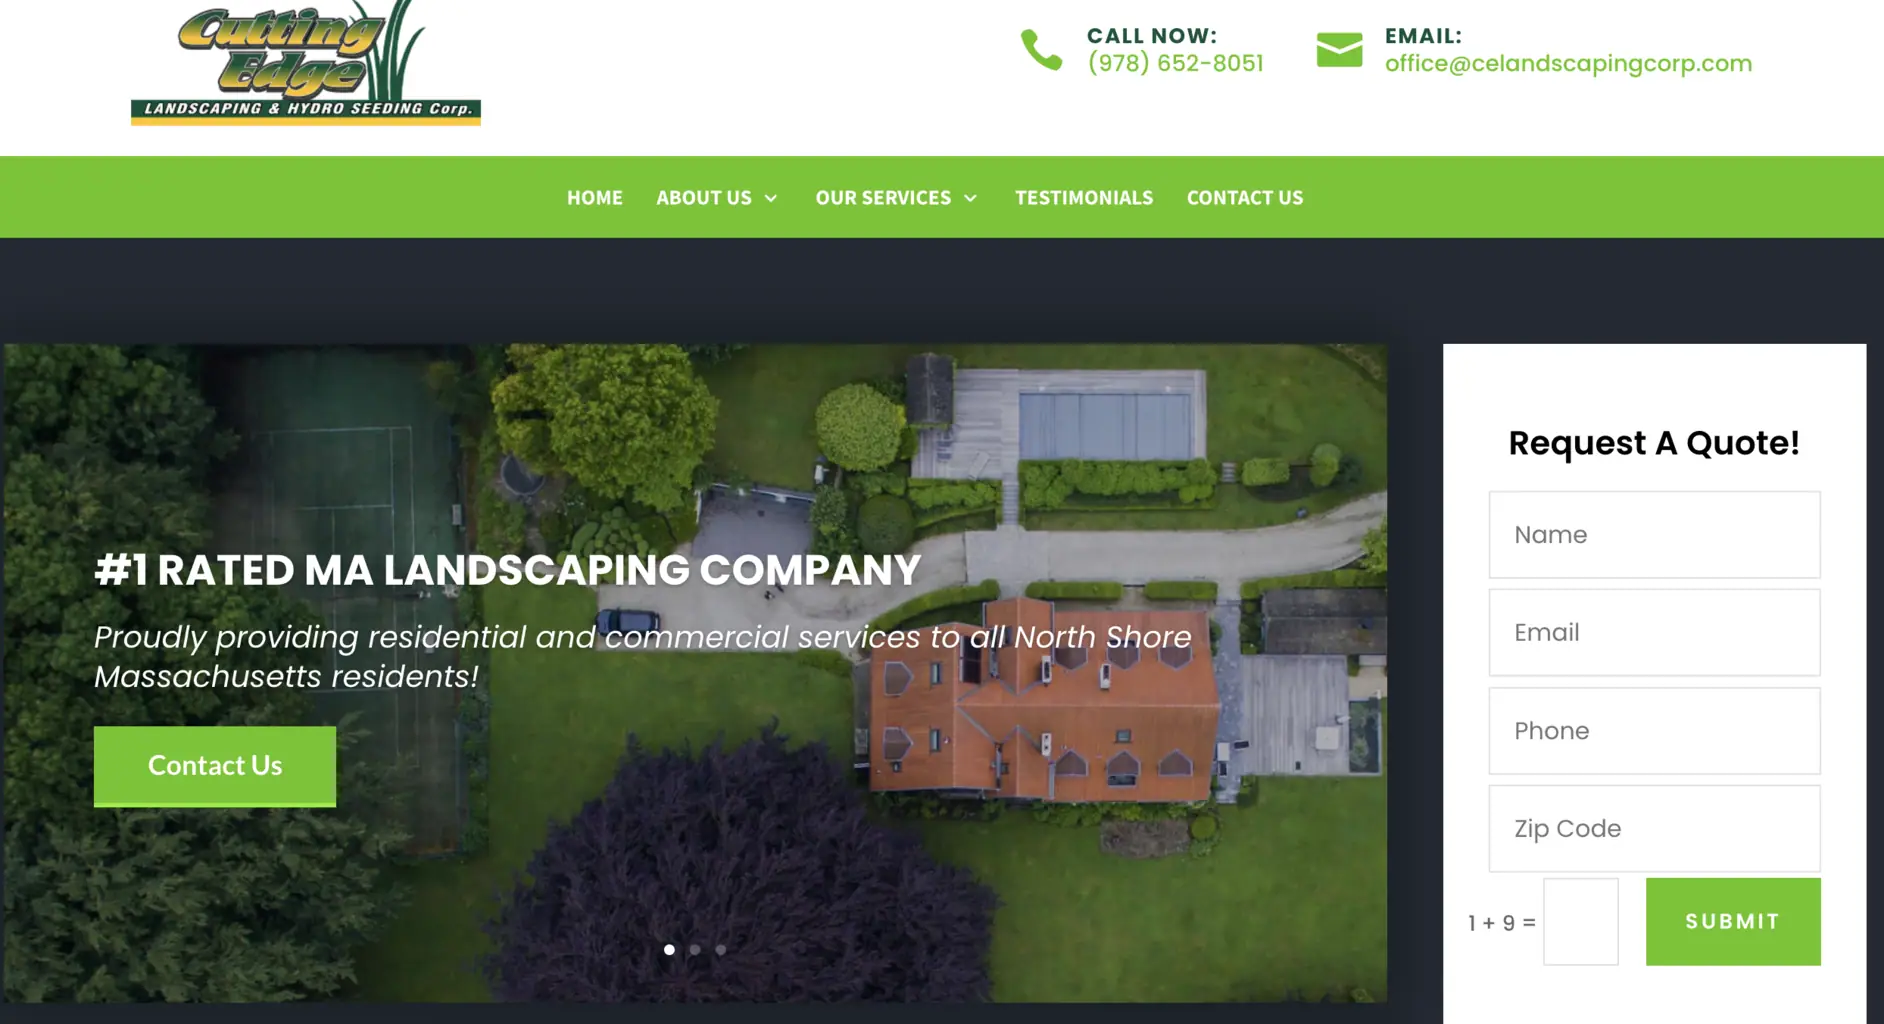 CE Landscaping Corp website design by business all in one marketing solutions